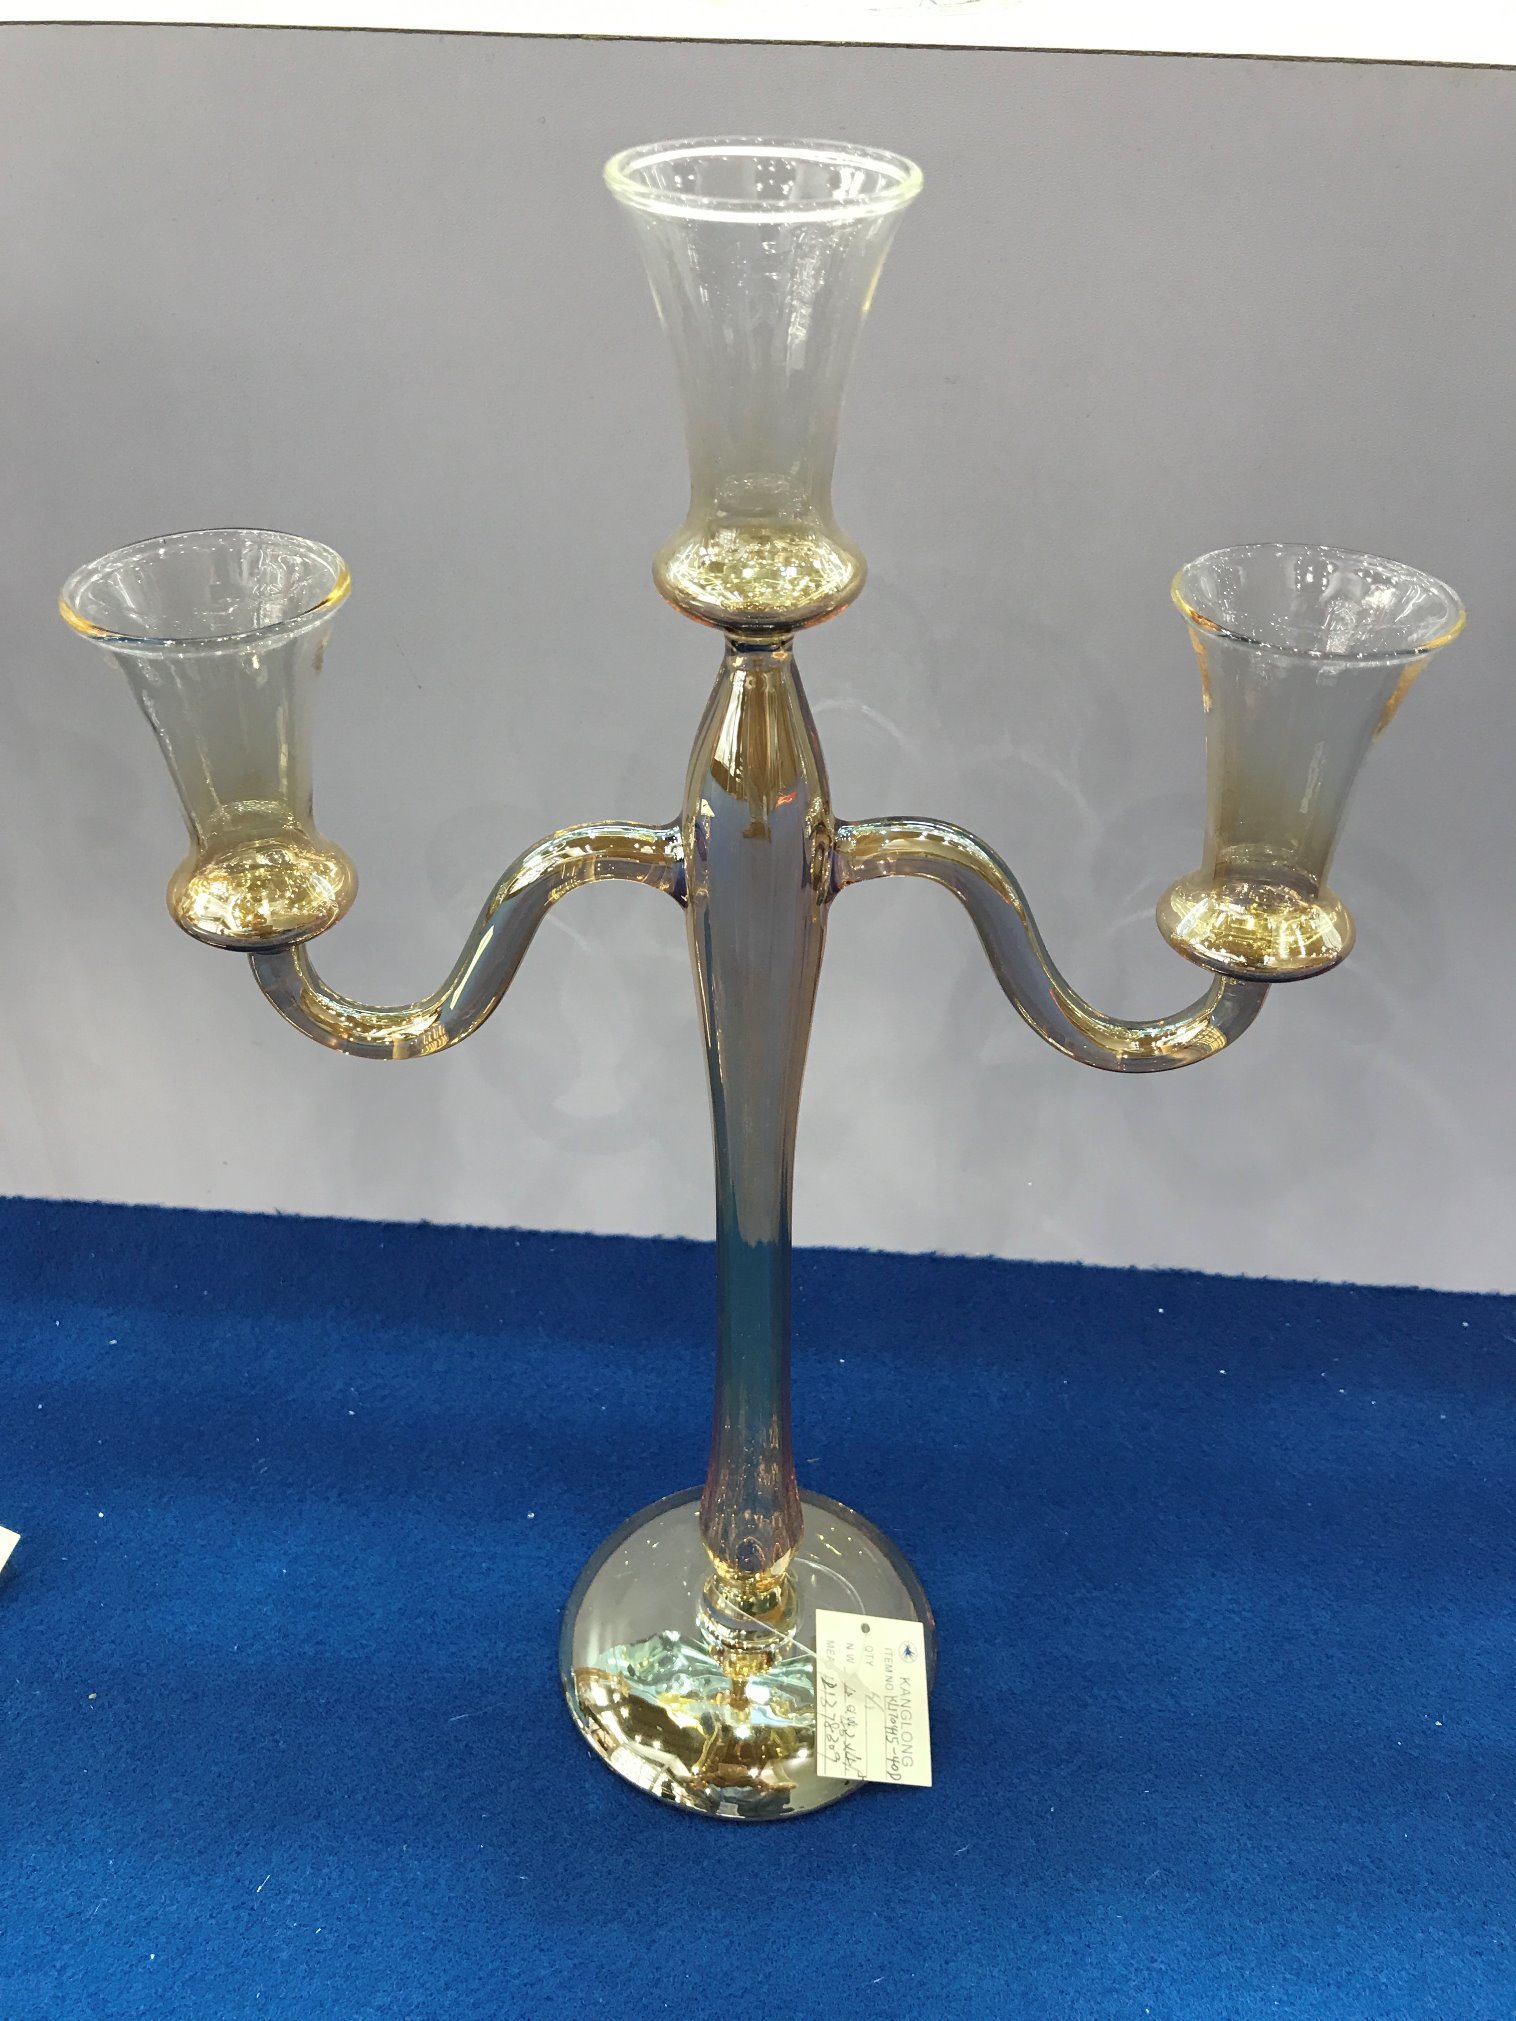 Metallic Gold Color Glass Candle Holder with Three Poster